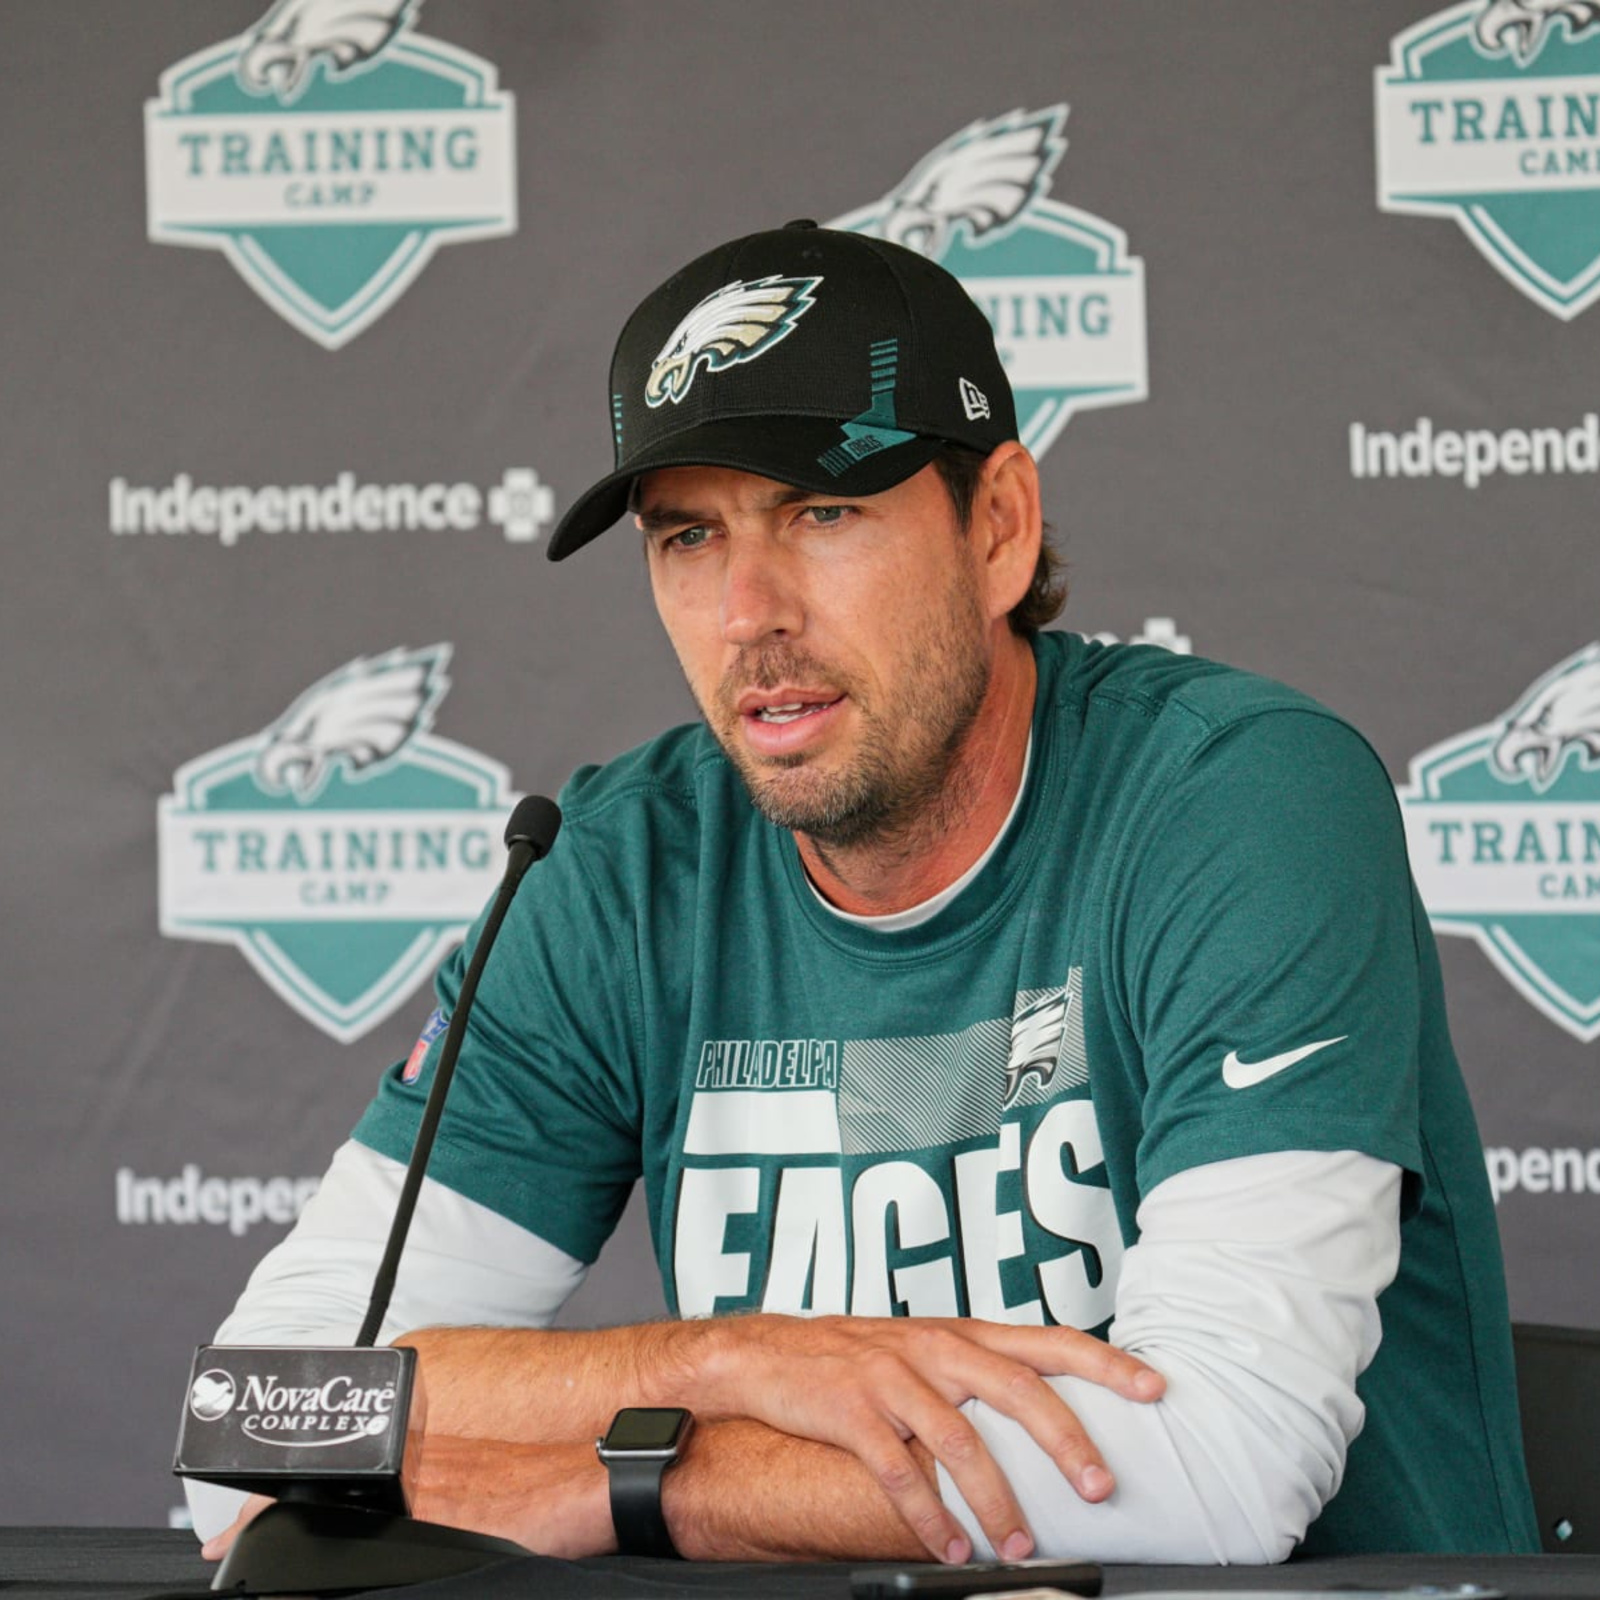 Seahawks OC search: Shane Steichen goes to the Eagles, cross him